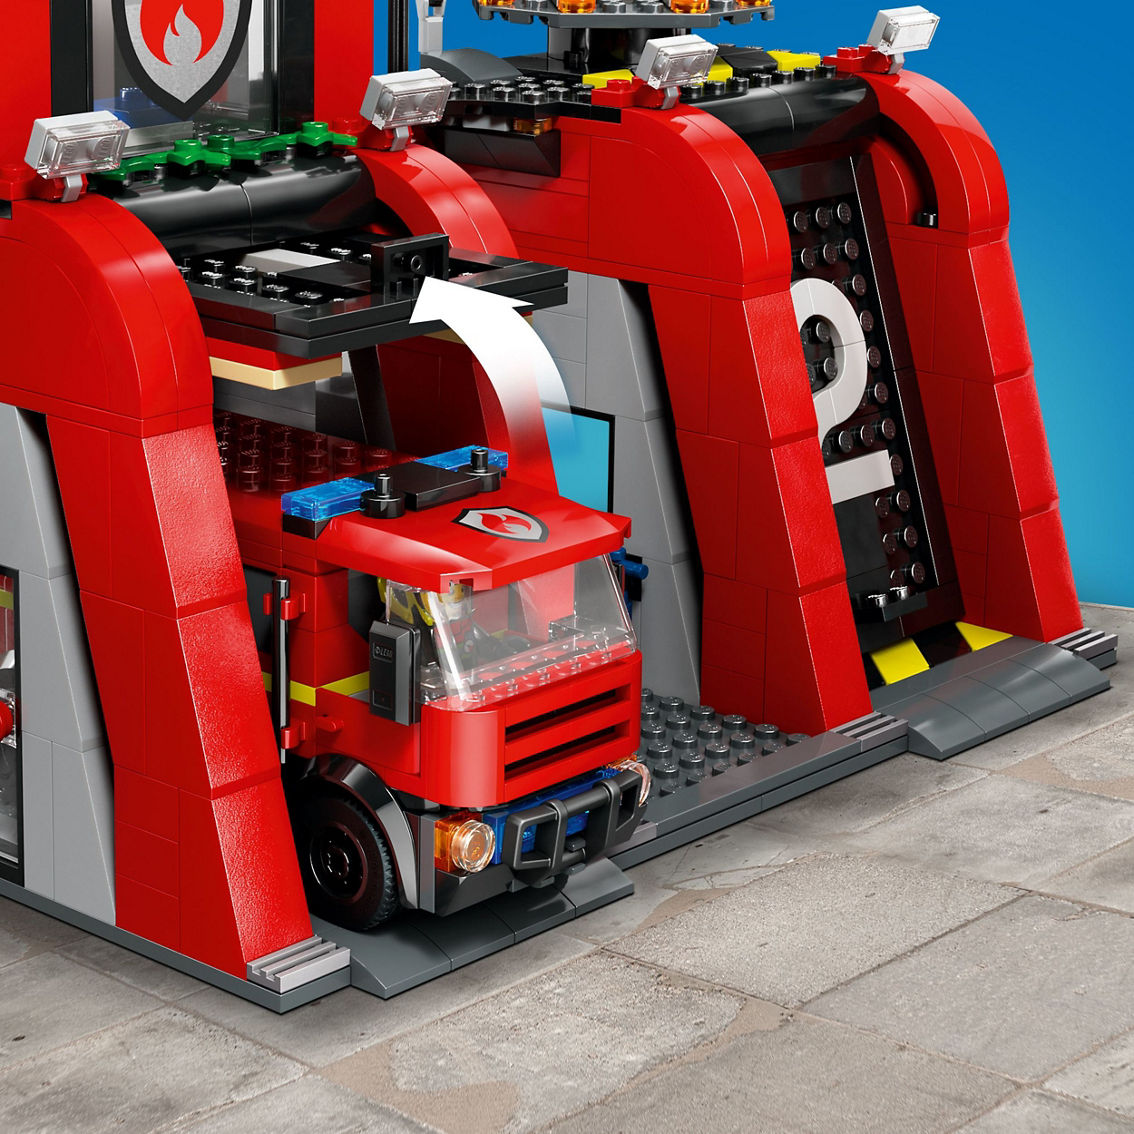 LEGO City Fire Station with Fire Truck 60414 - Image 4 of 7